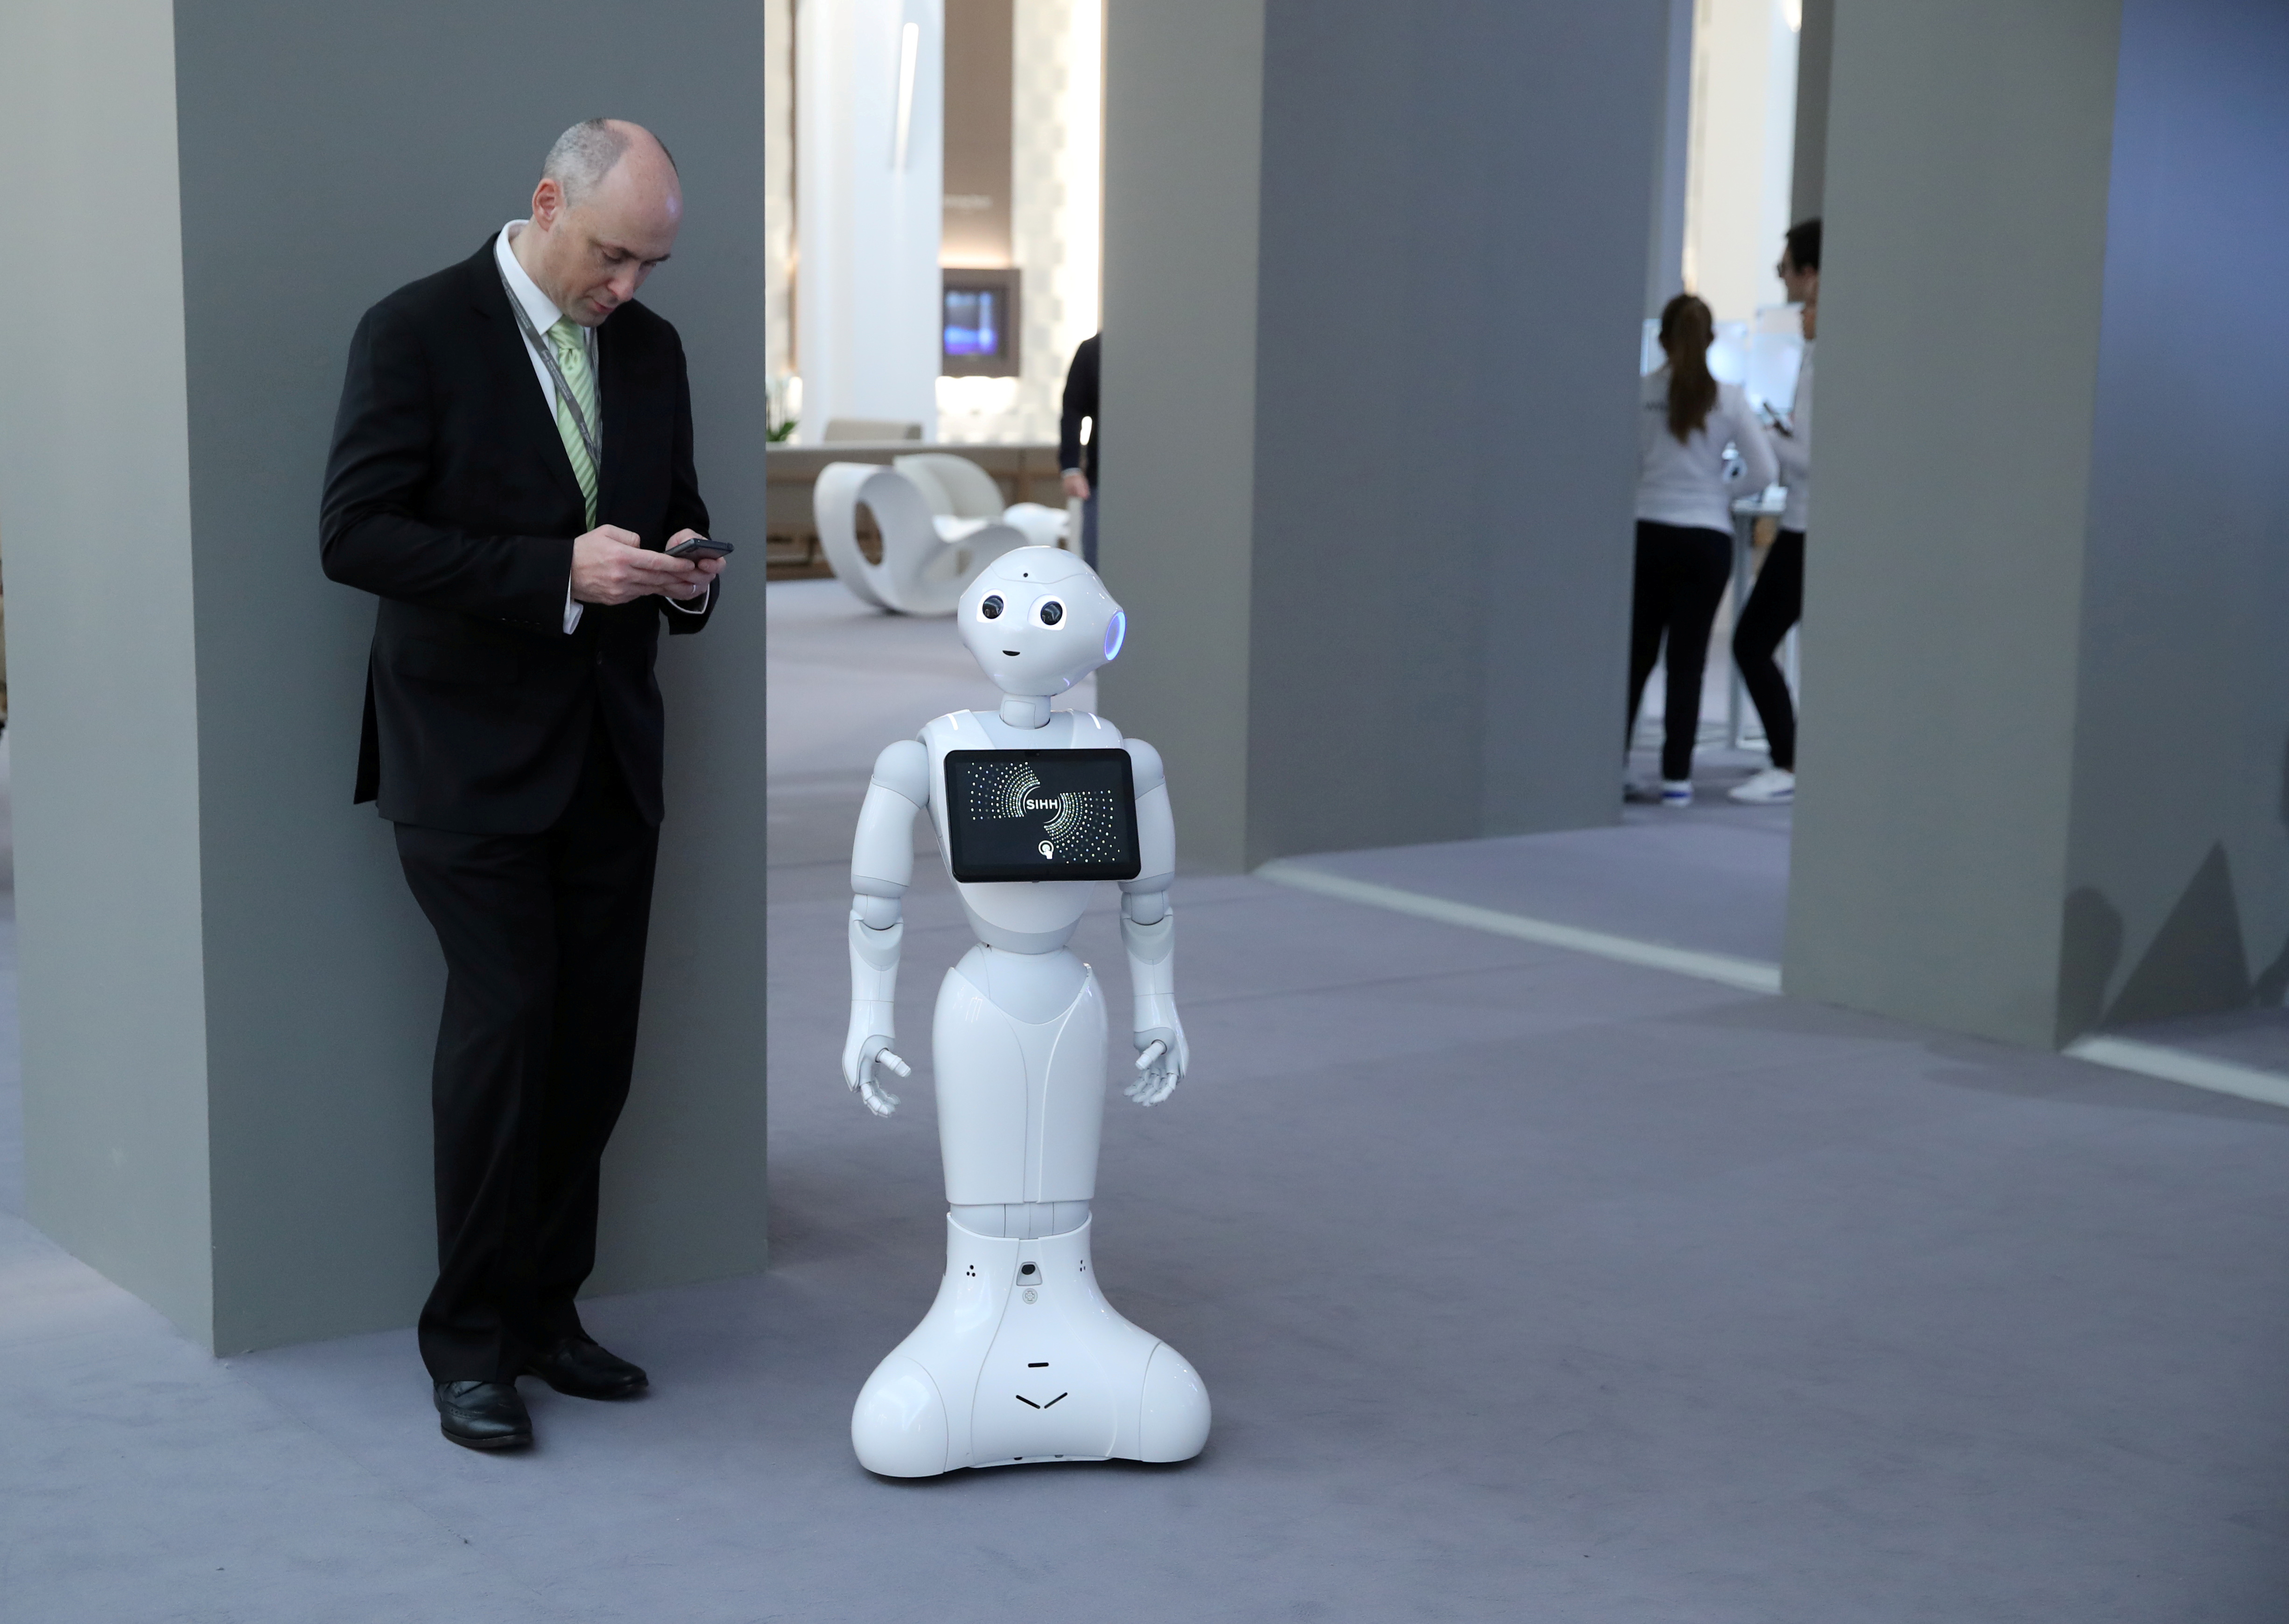 A visitor looks at his mobile device next to Pepper the robot during the 